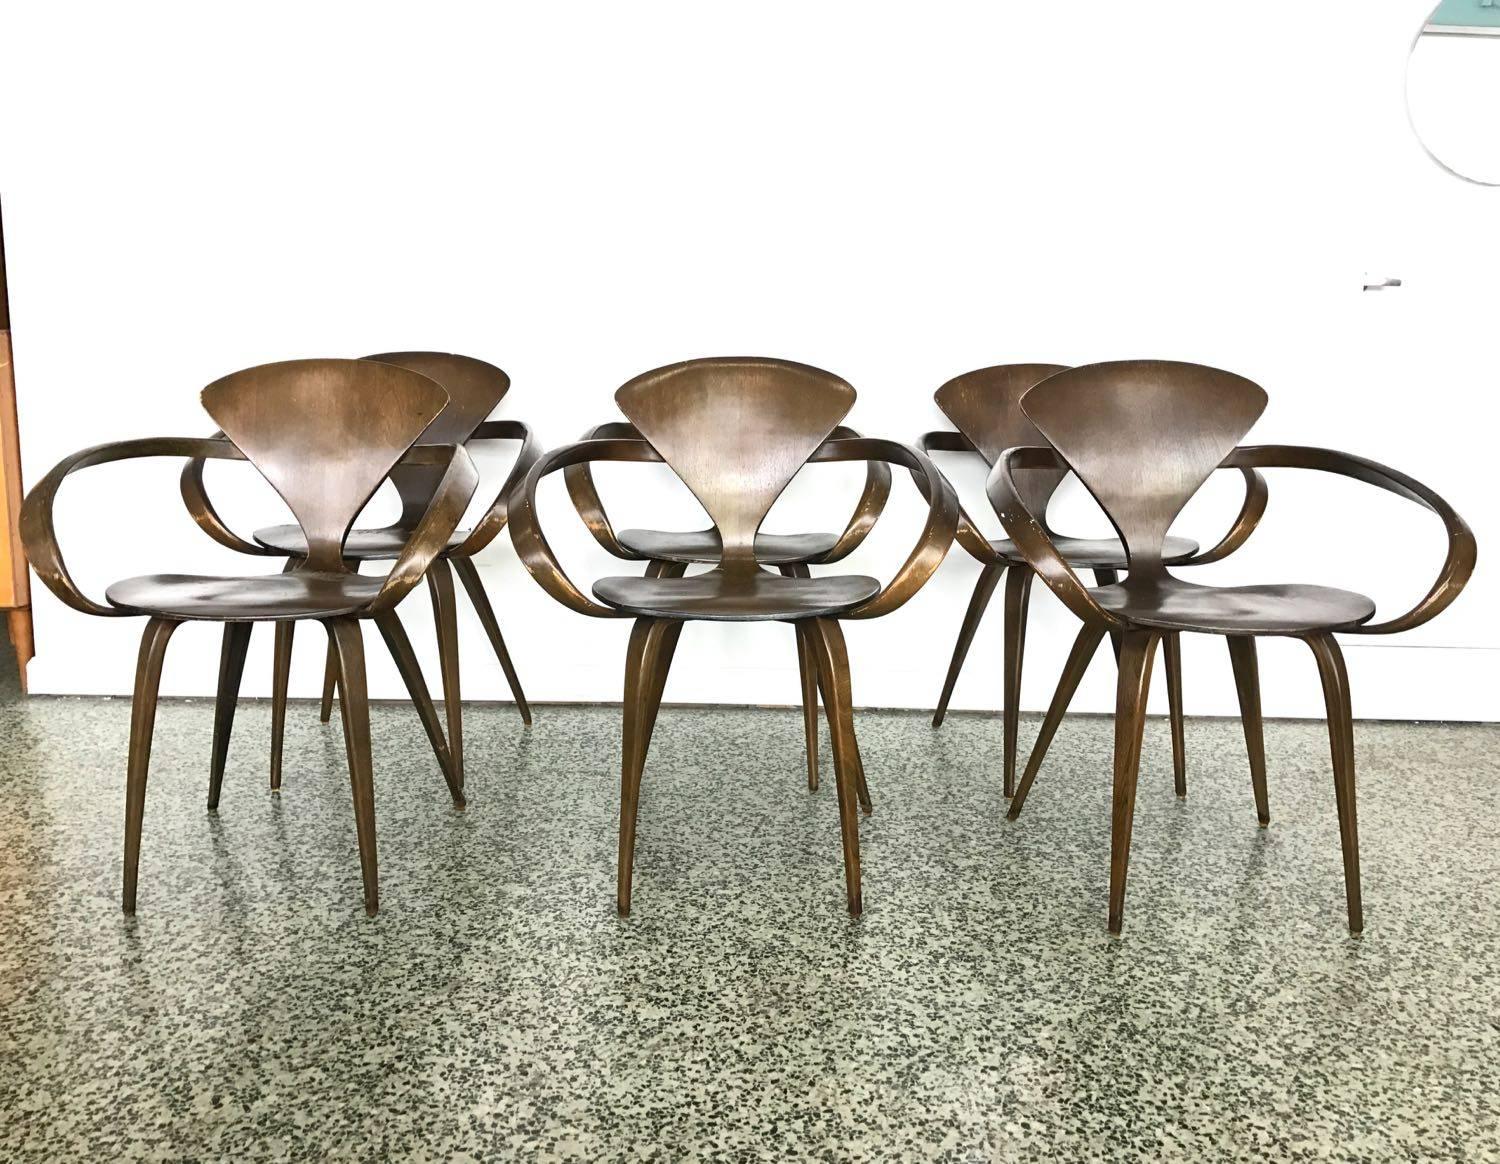 Designer: Norman Cherner
Period or style: Mid-Century Modern
Country: US
Manufacture: Plycraft
Date: 1960s